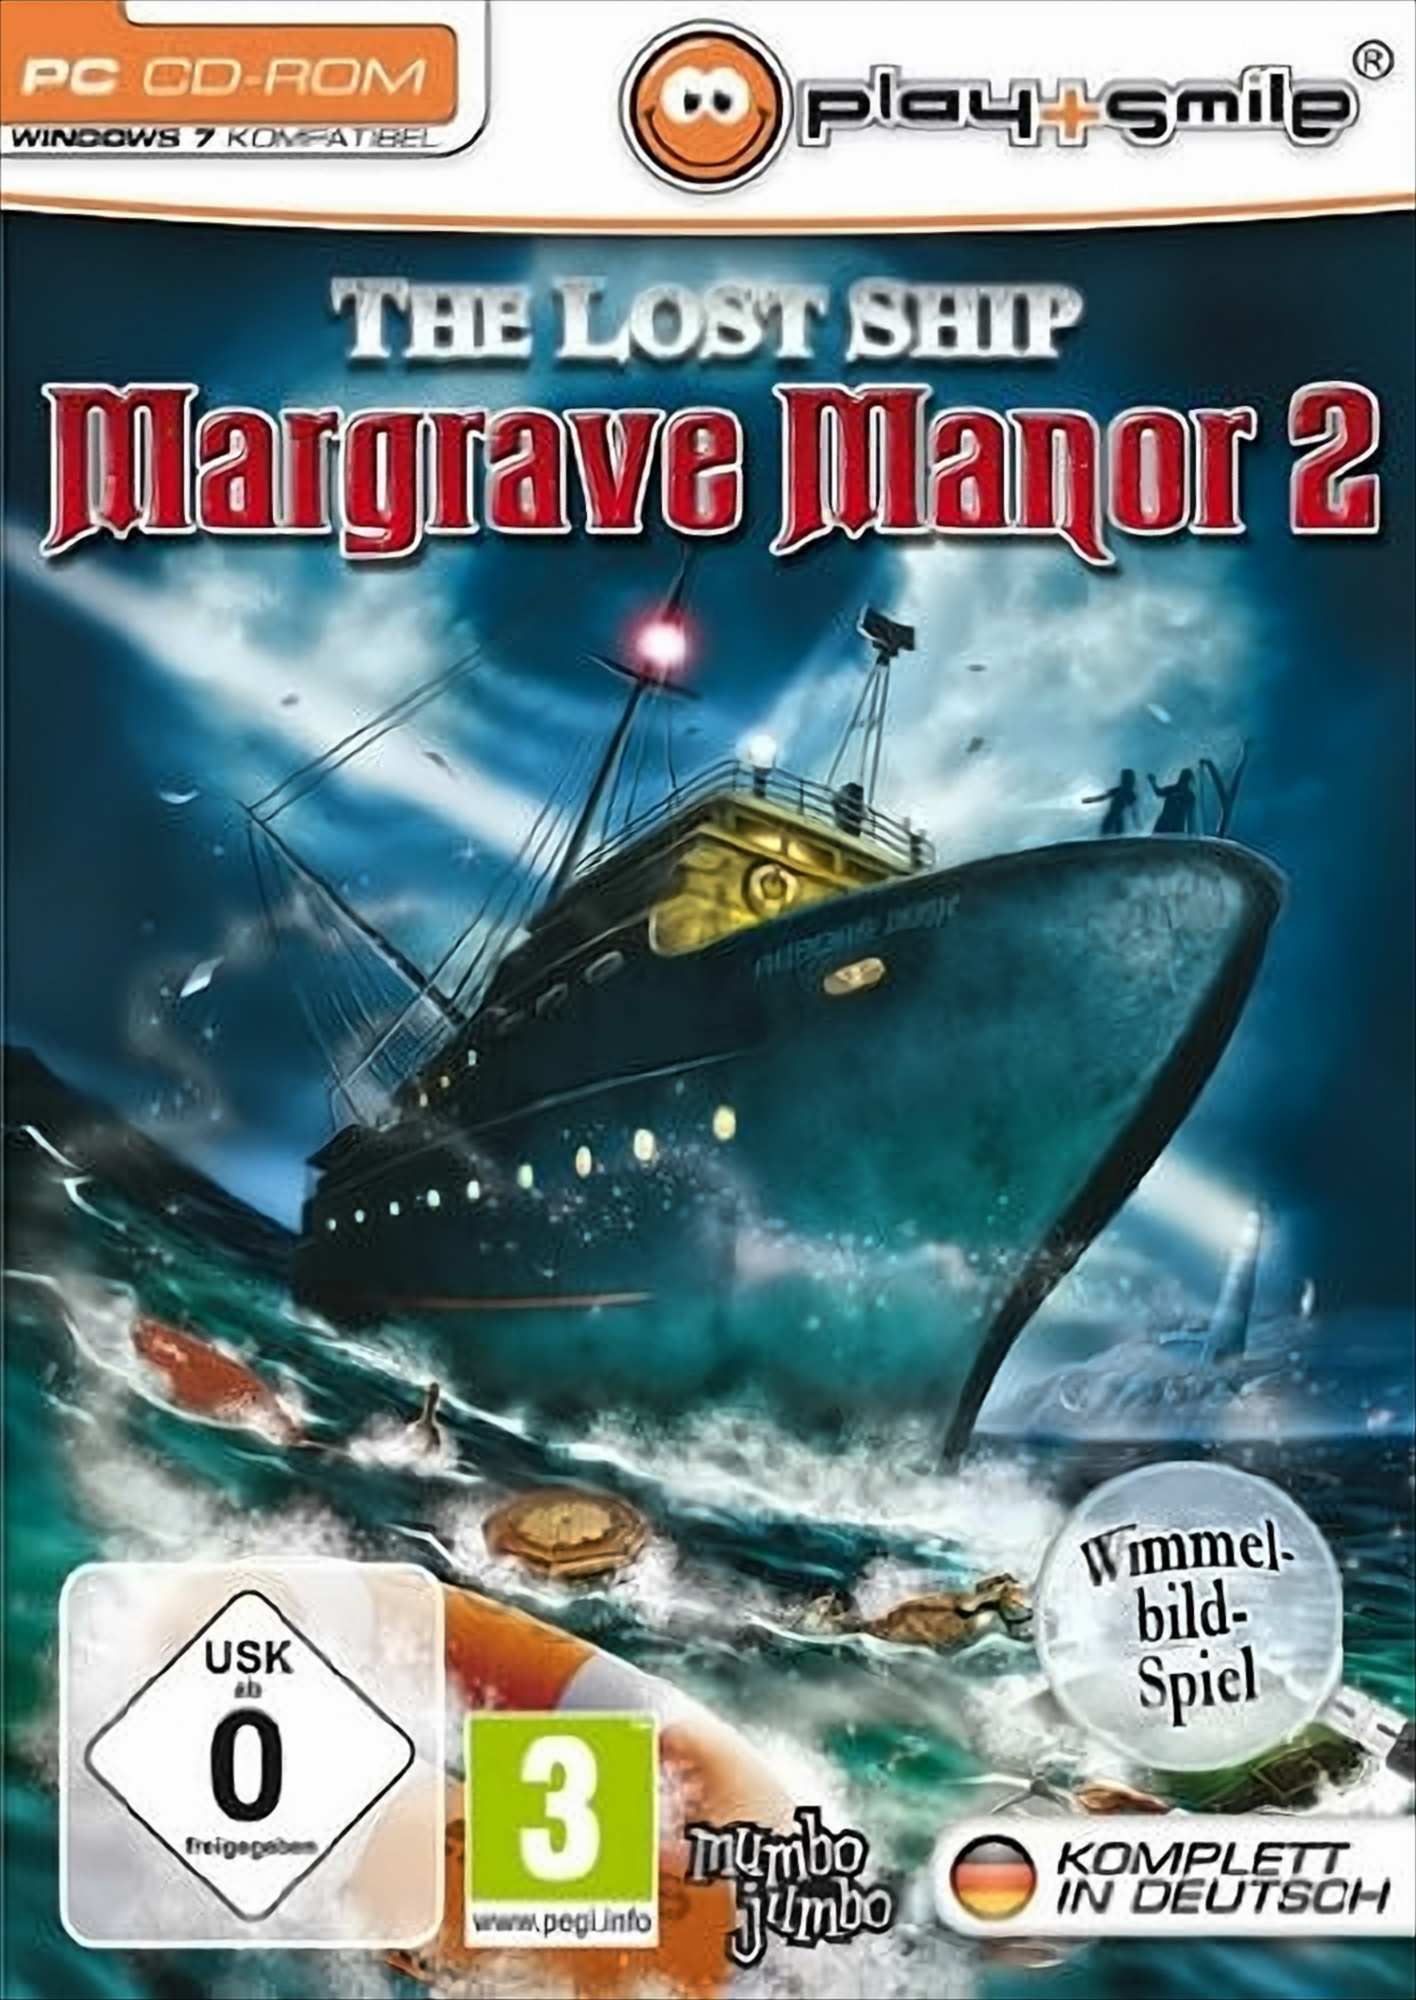 Margrave Manor 2 - [PC] - Ship The Lost